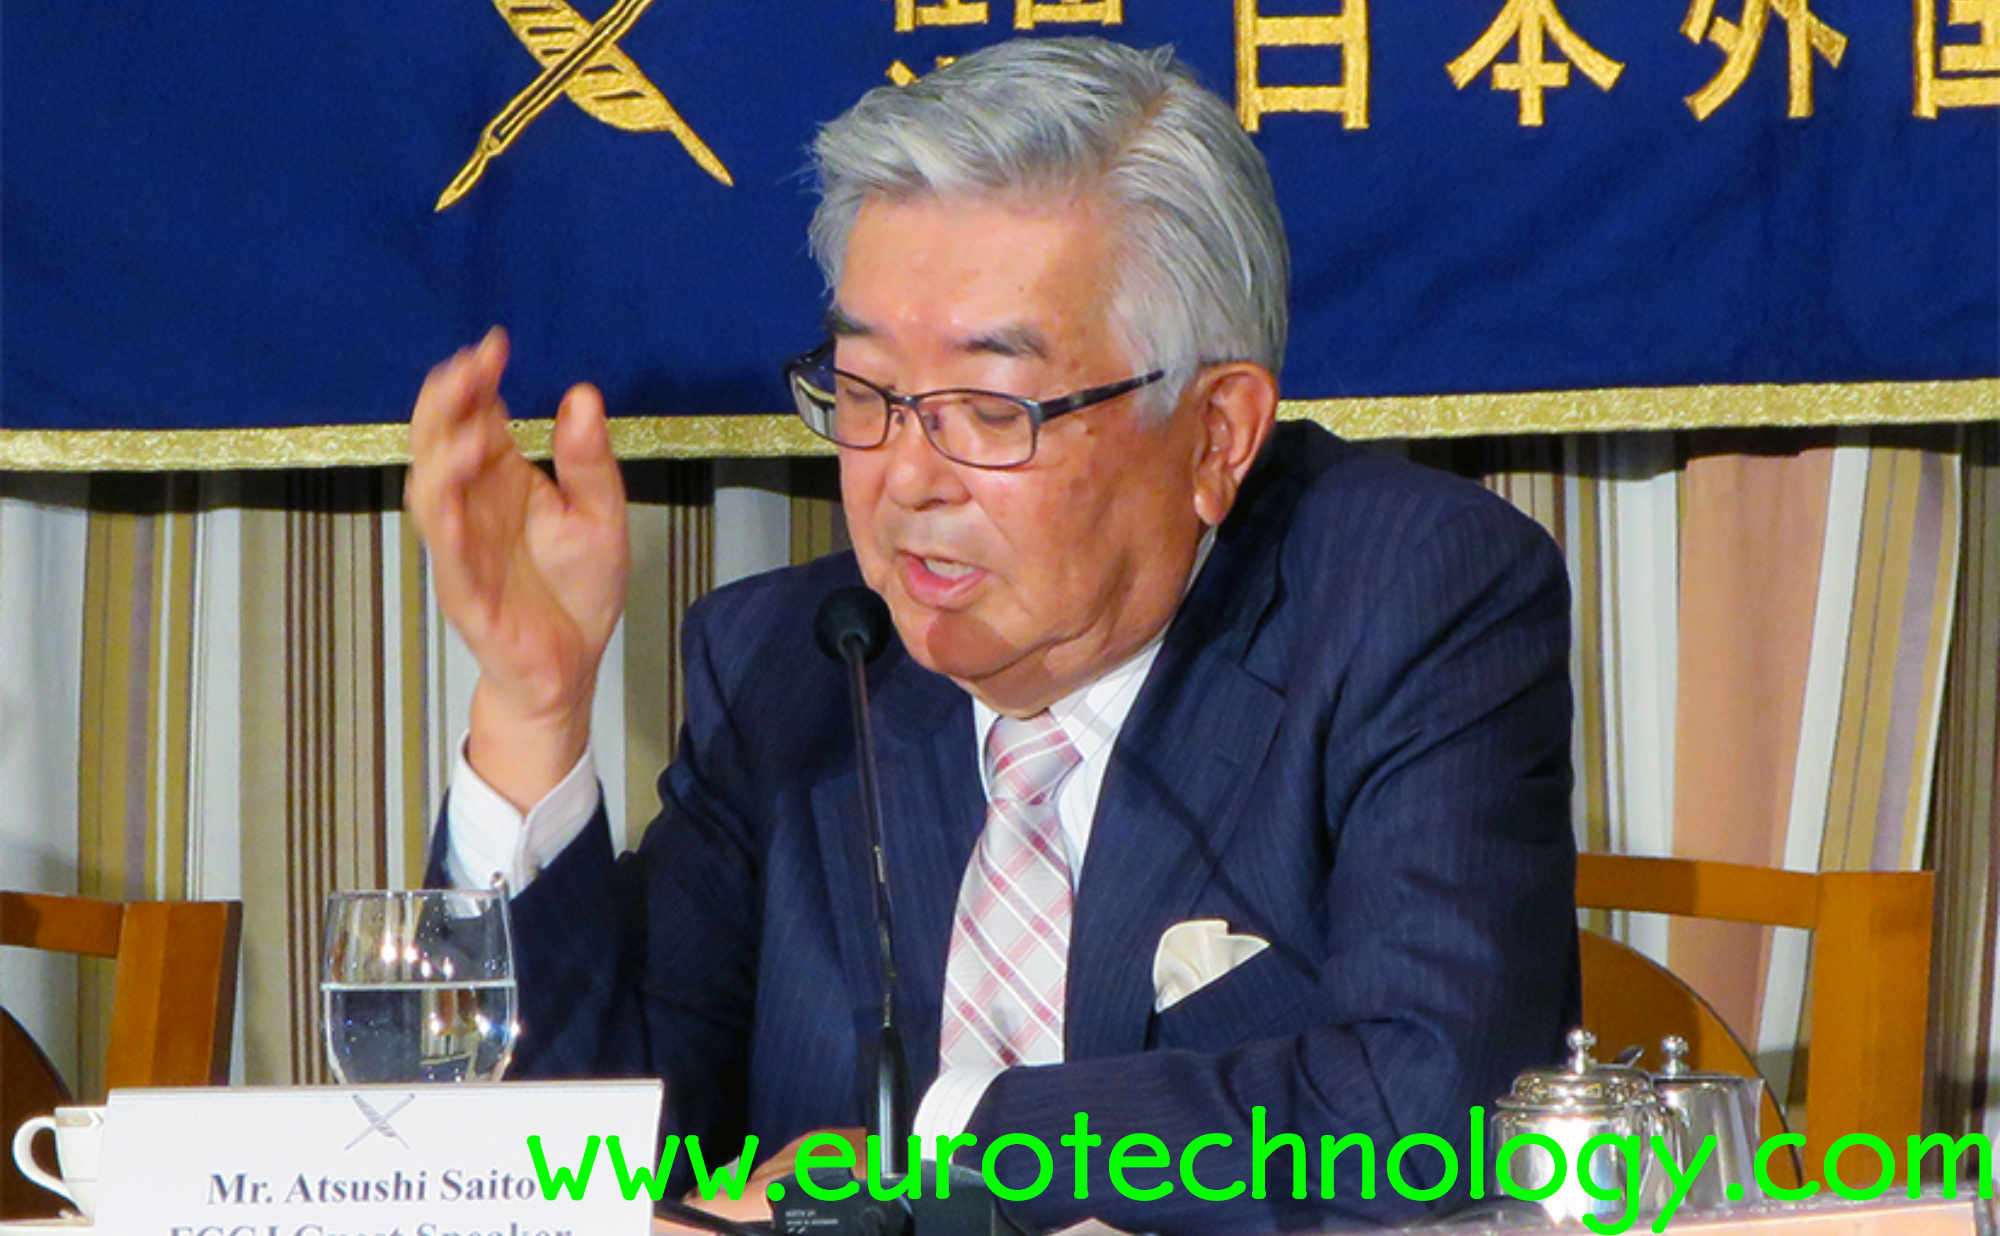 Japan Exchange Group CEO Atsushi Saito: proud of Corporate Governance achievements, but ashamed of Toshiba